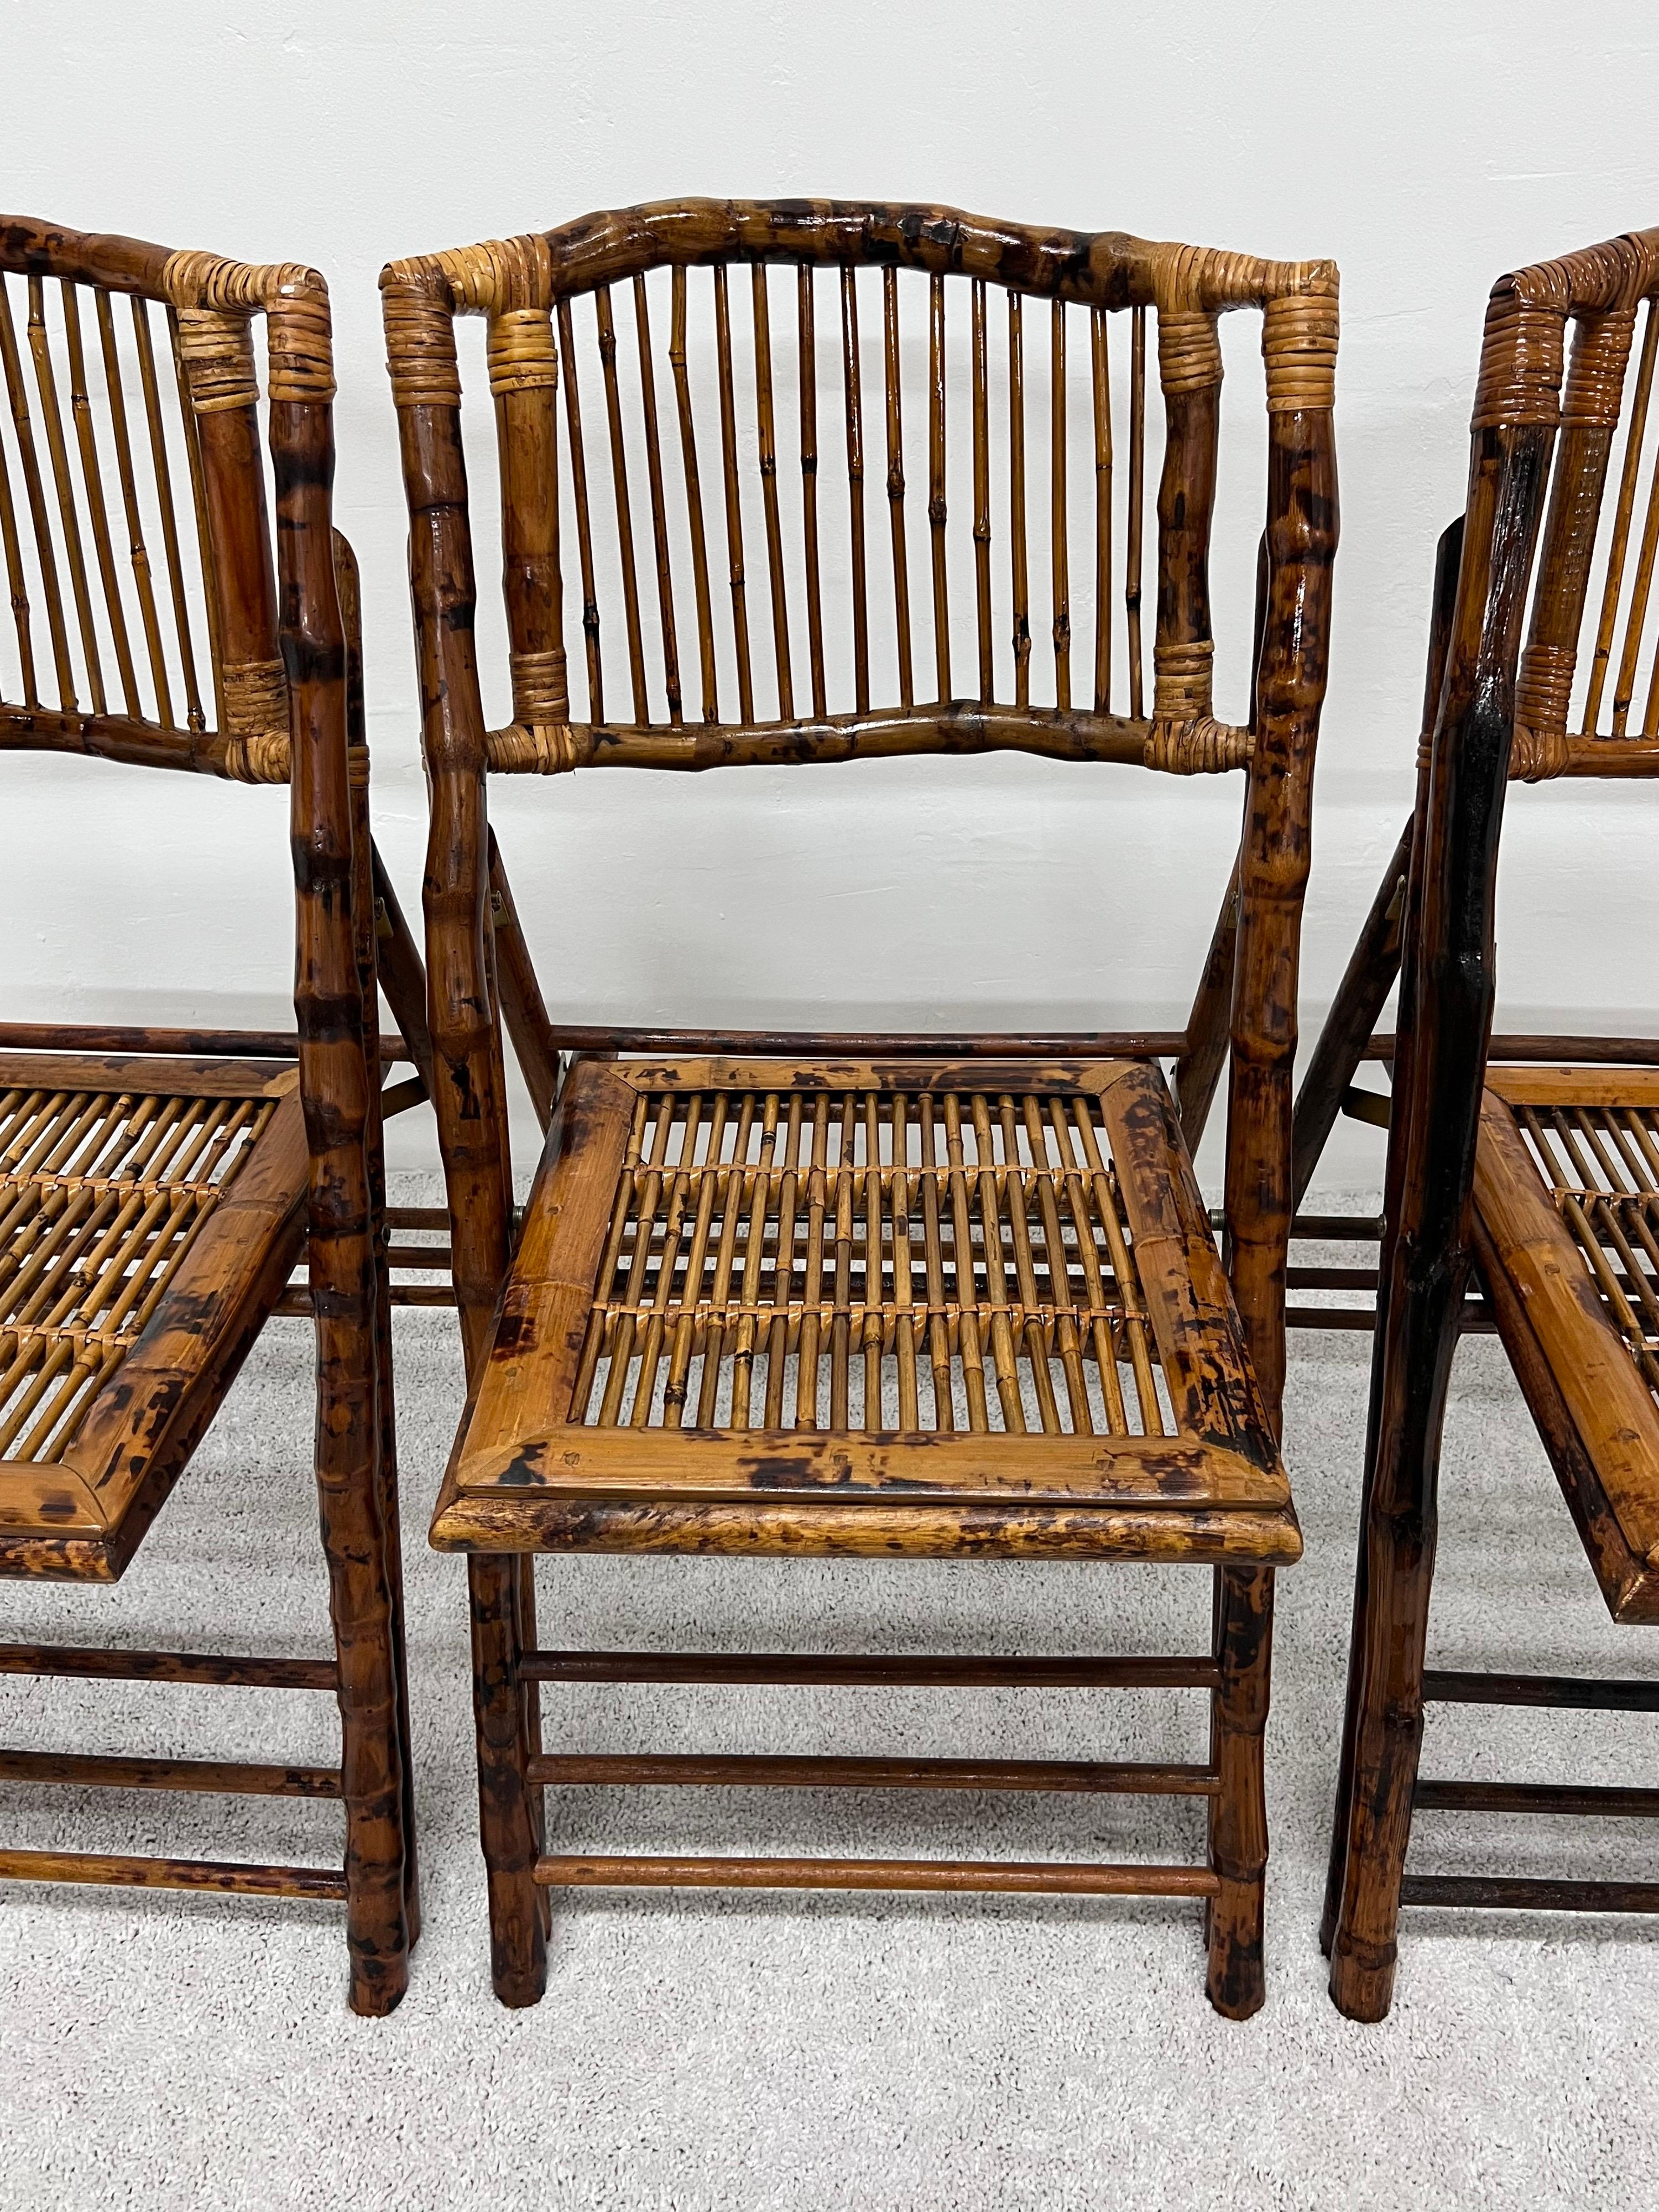 Philippine Mid-Century British Colonial Style Bamboo Folding Chairs, Set of Four